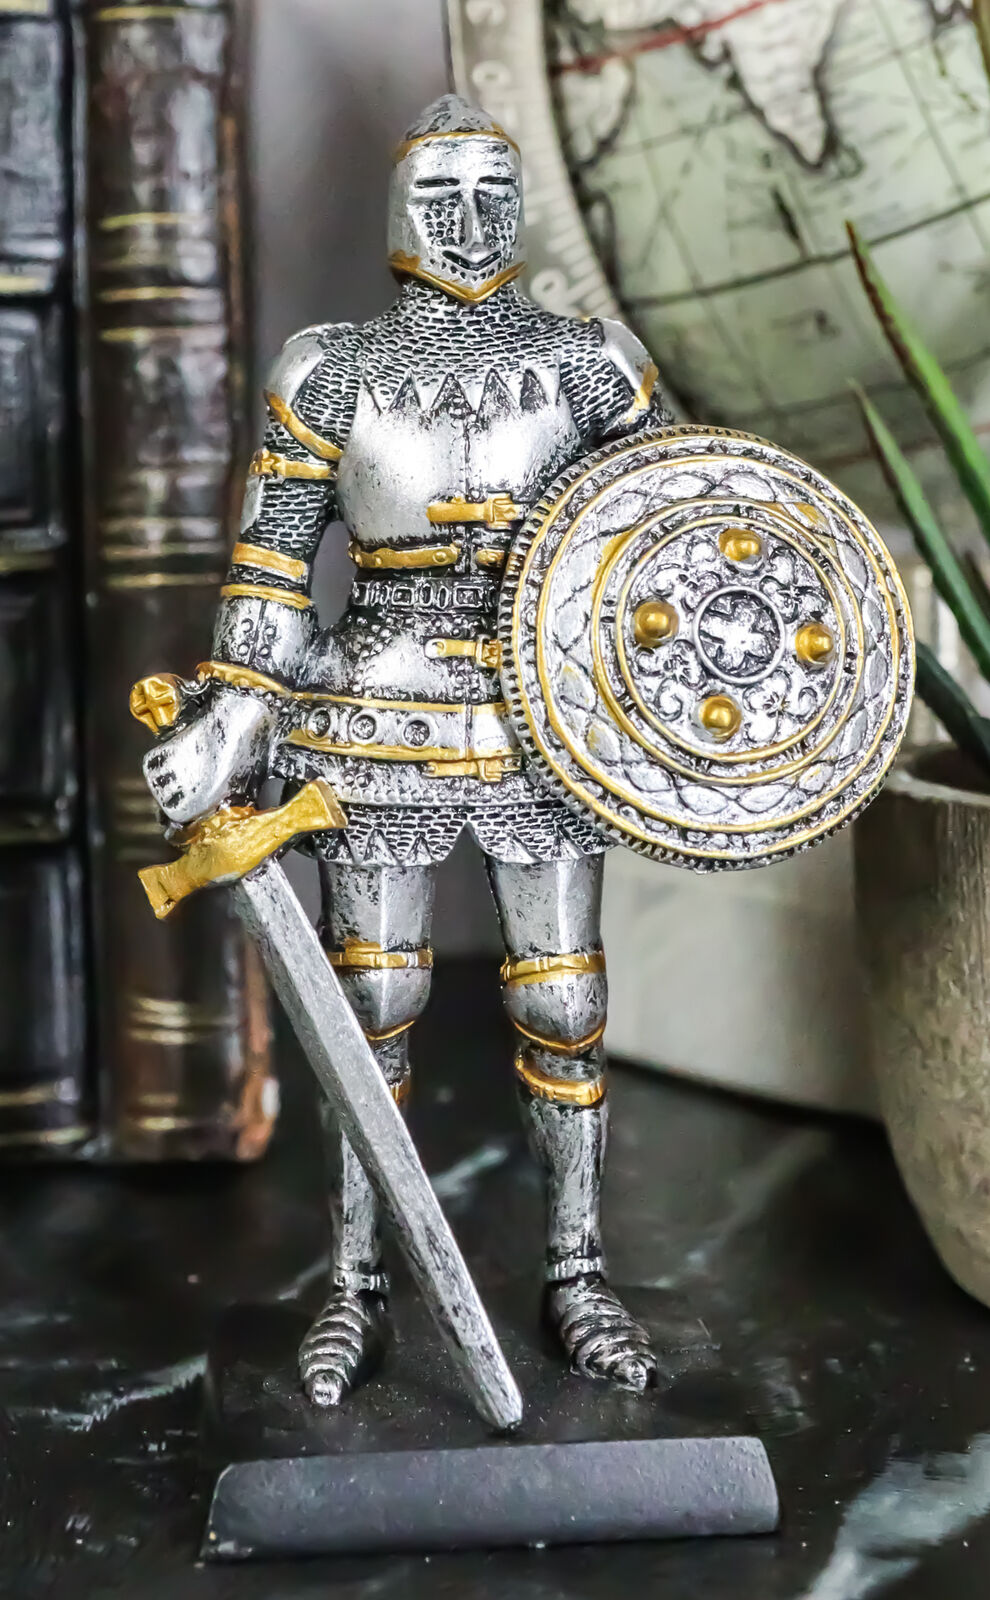 Ebros Royal Knight with Dagger Sword and Round Shield Miniature Figurine 5